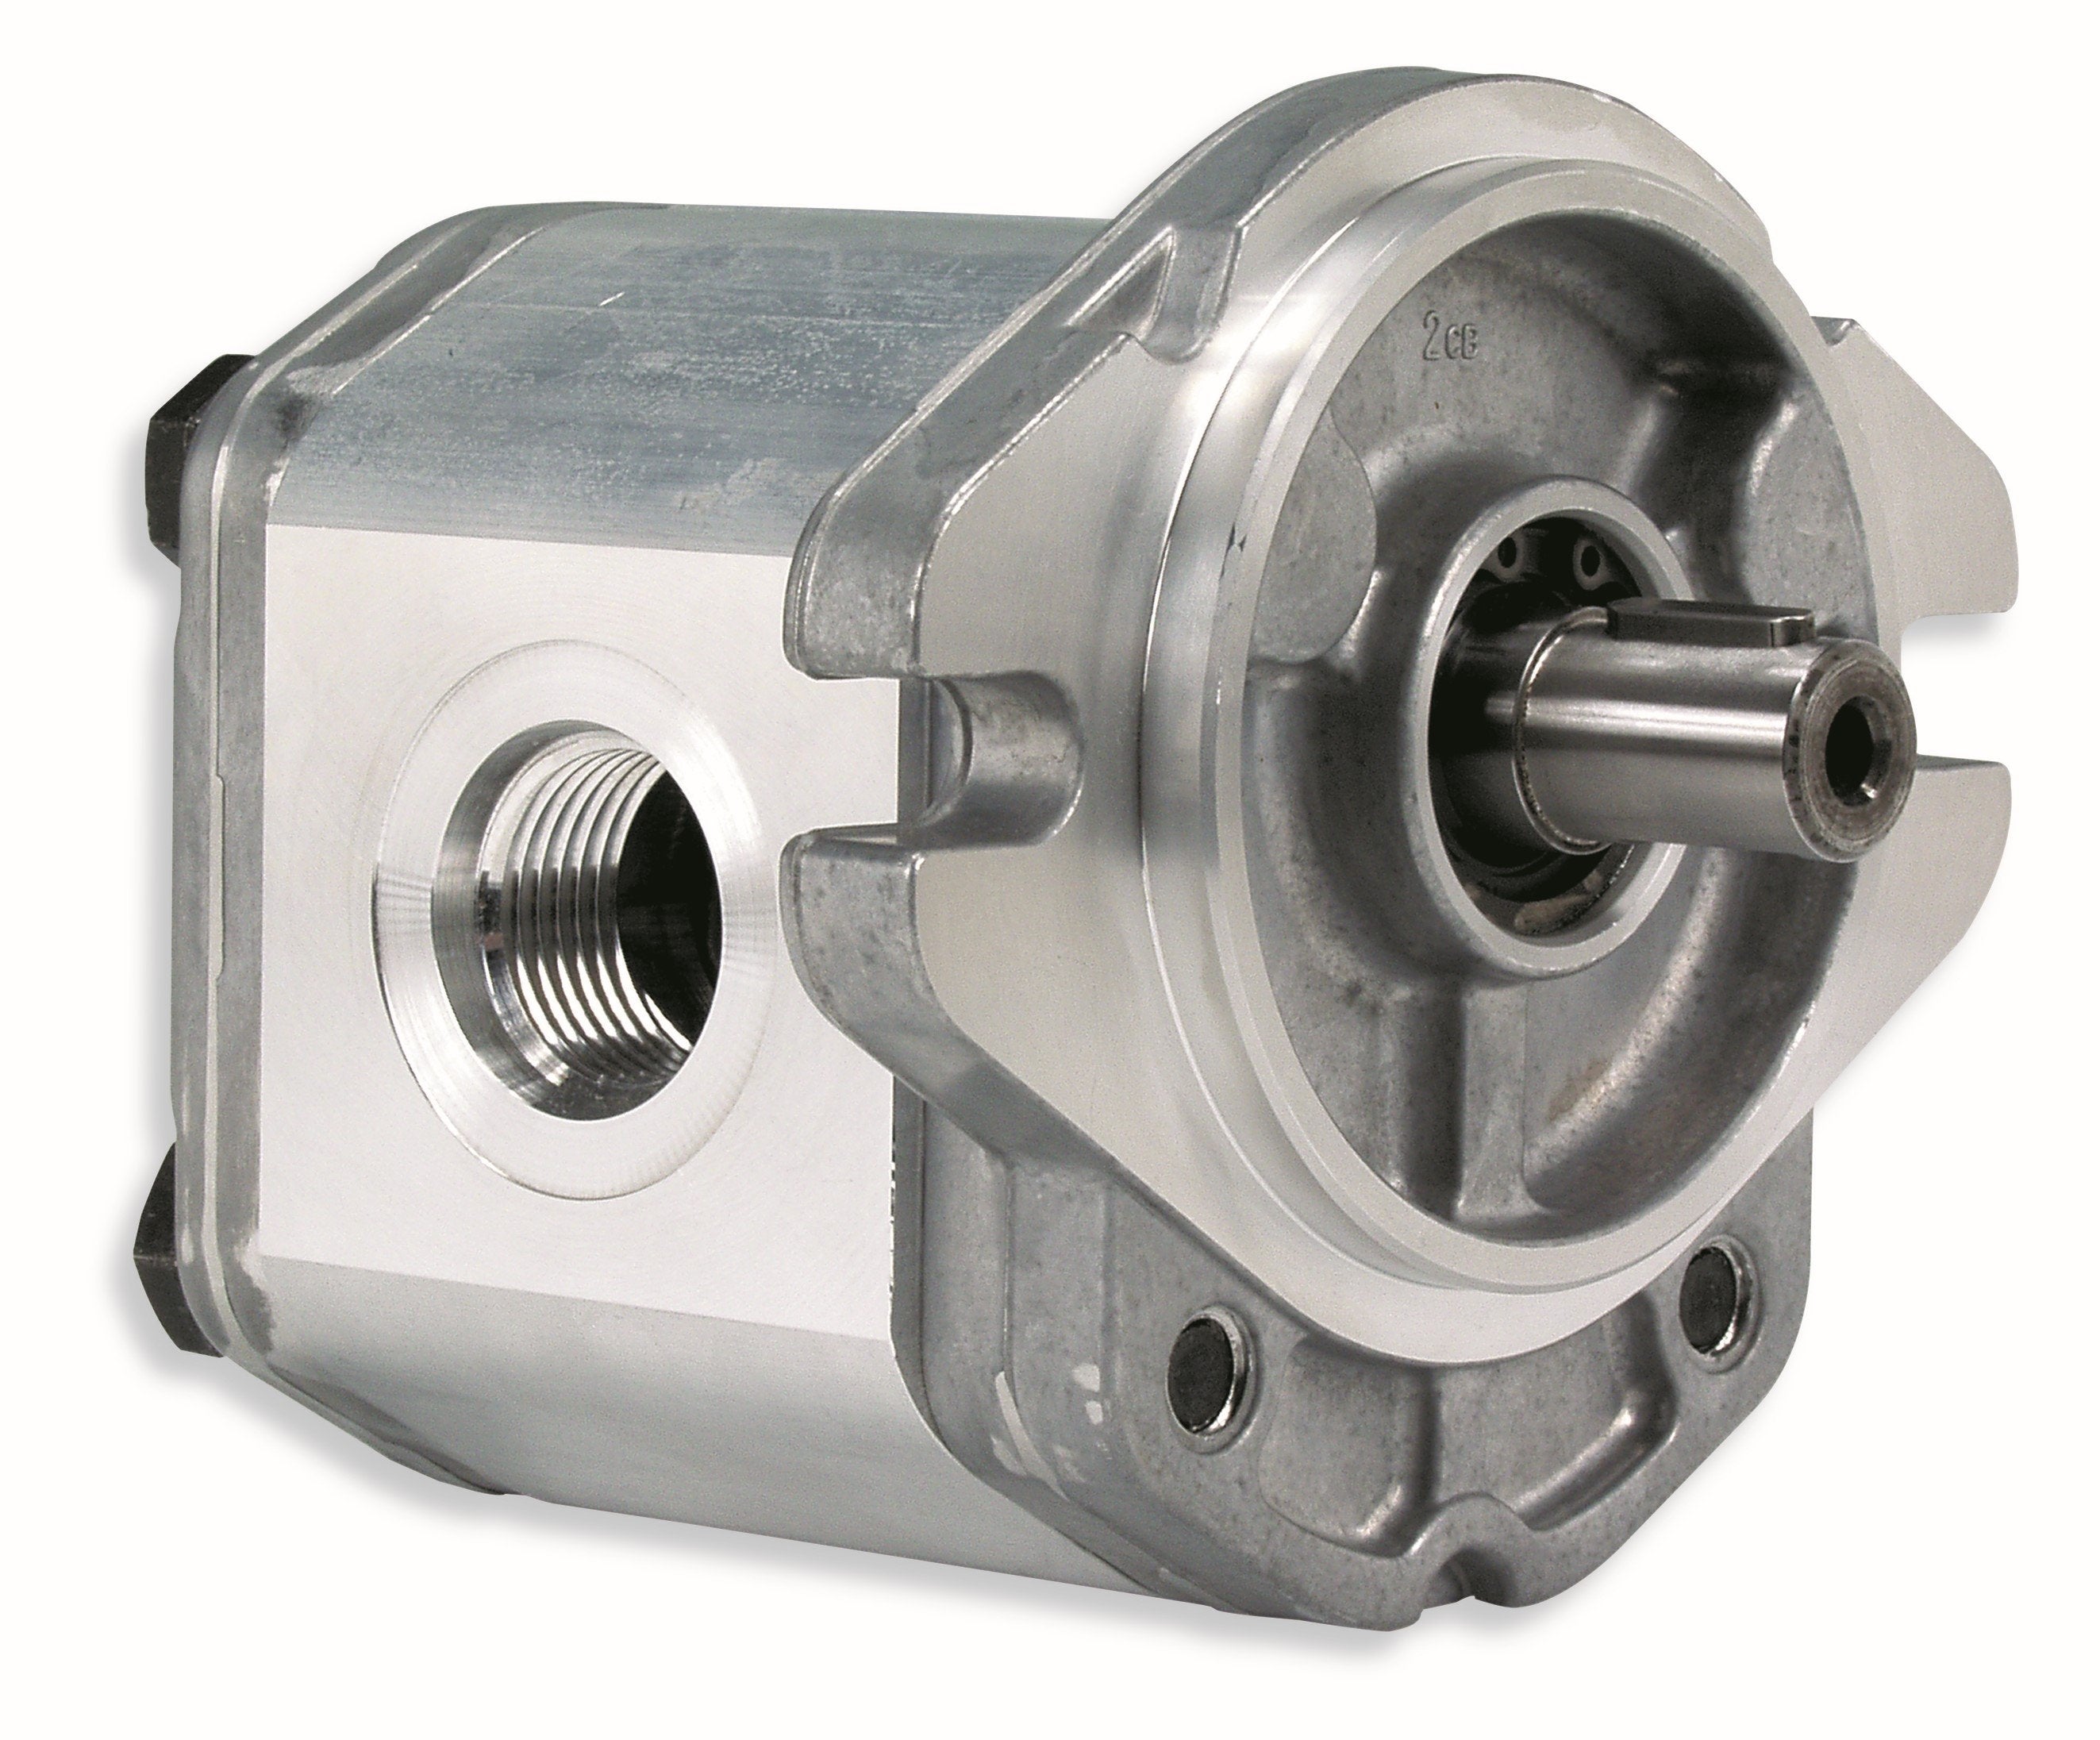 GHM2A-R-13-S1-E2 : Marzocchi Gear Motor, Bidirectional, 9.6cc, 4060psi rated, 4000RPM, 0.75 (3/4") #12 SAE ports, 9T 16/32DP Splined Shaft